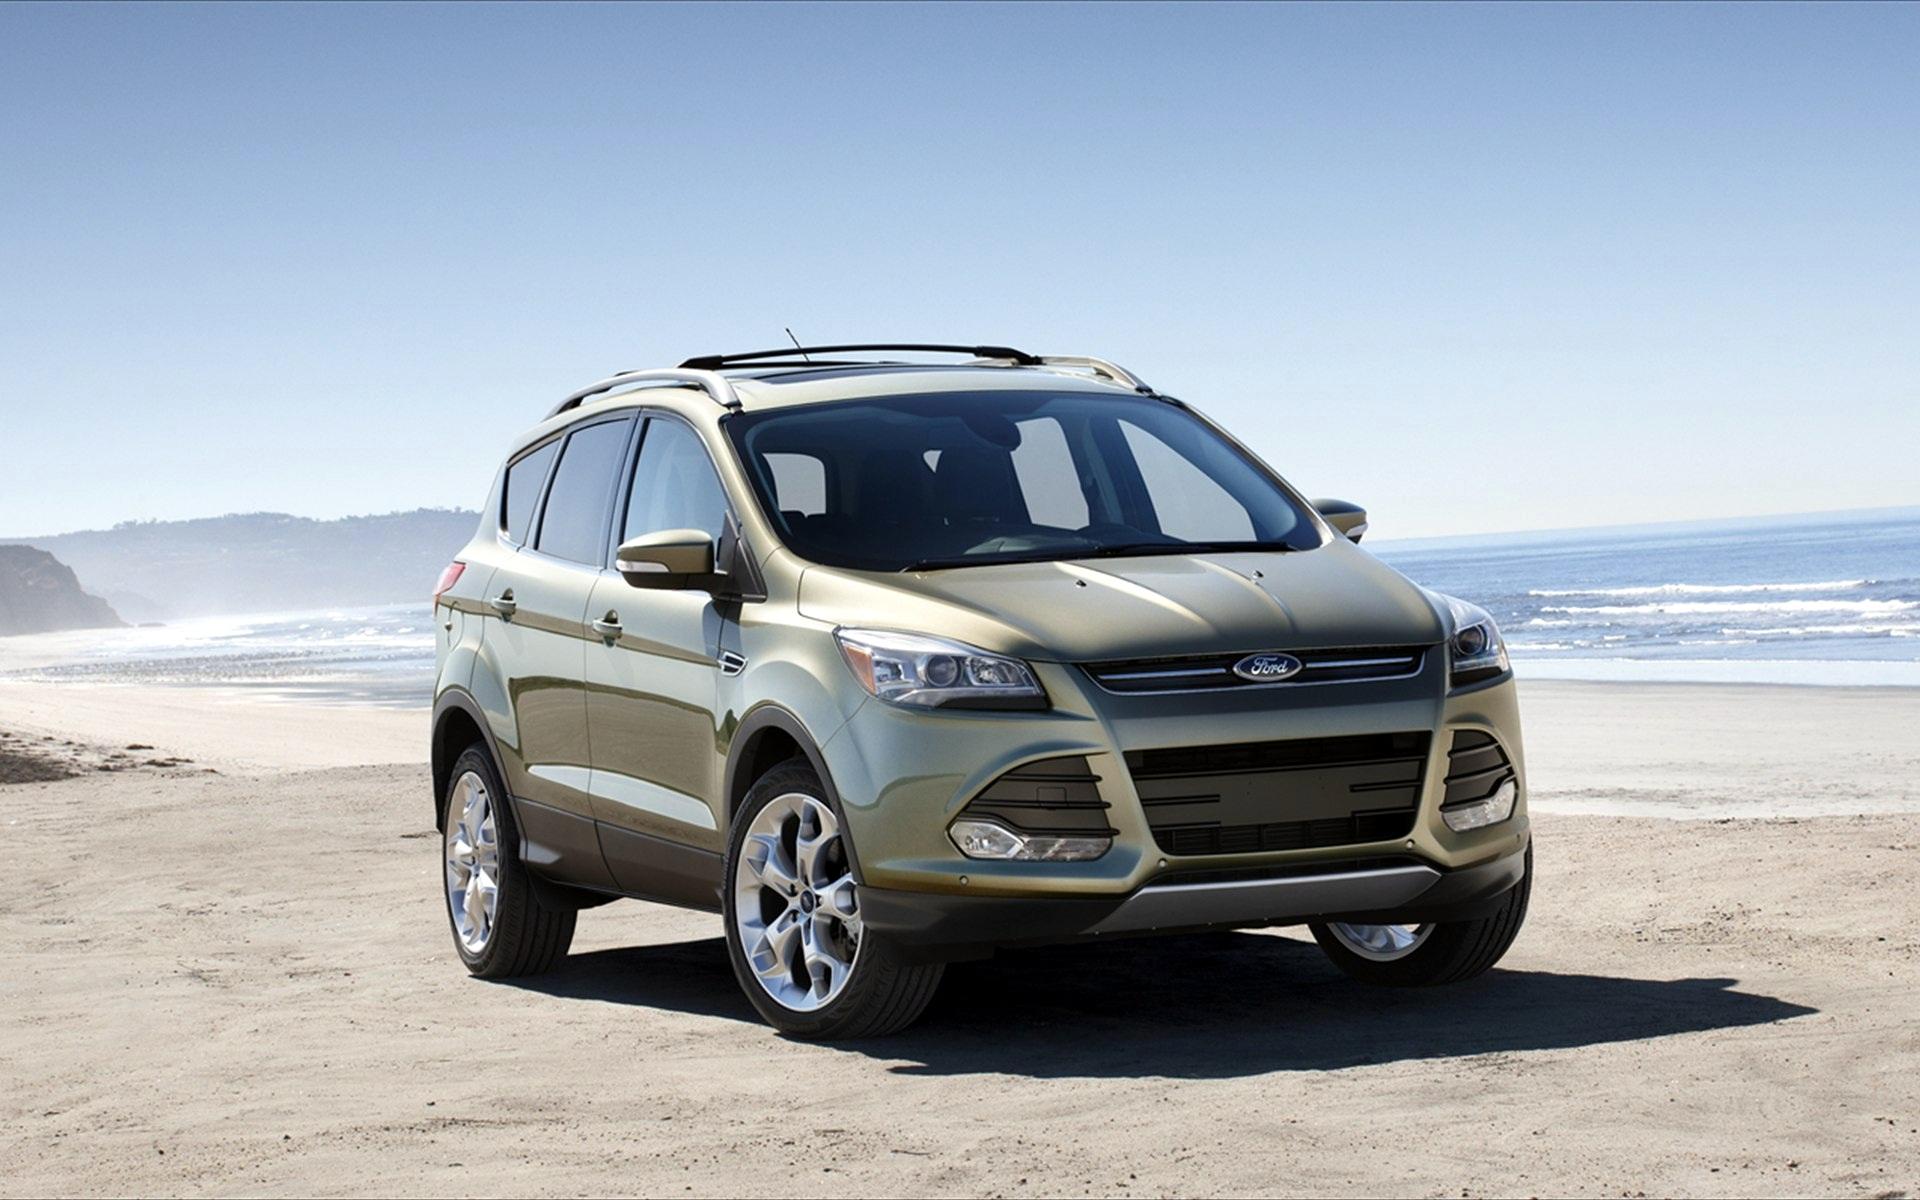 Ford Escape Wallpapers